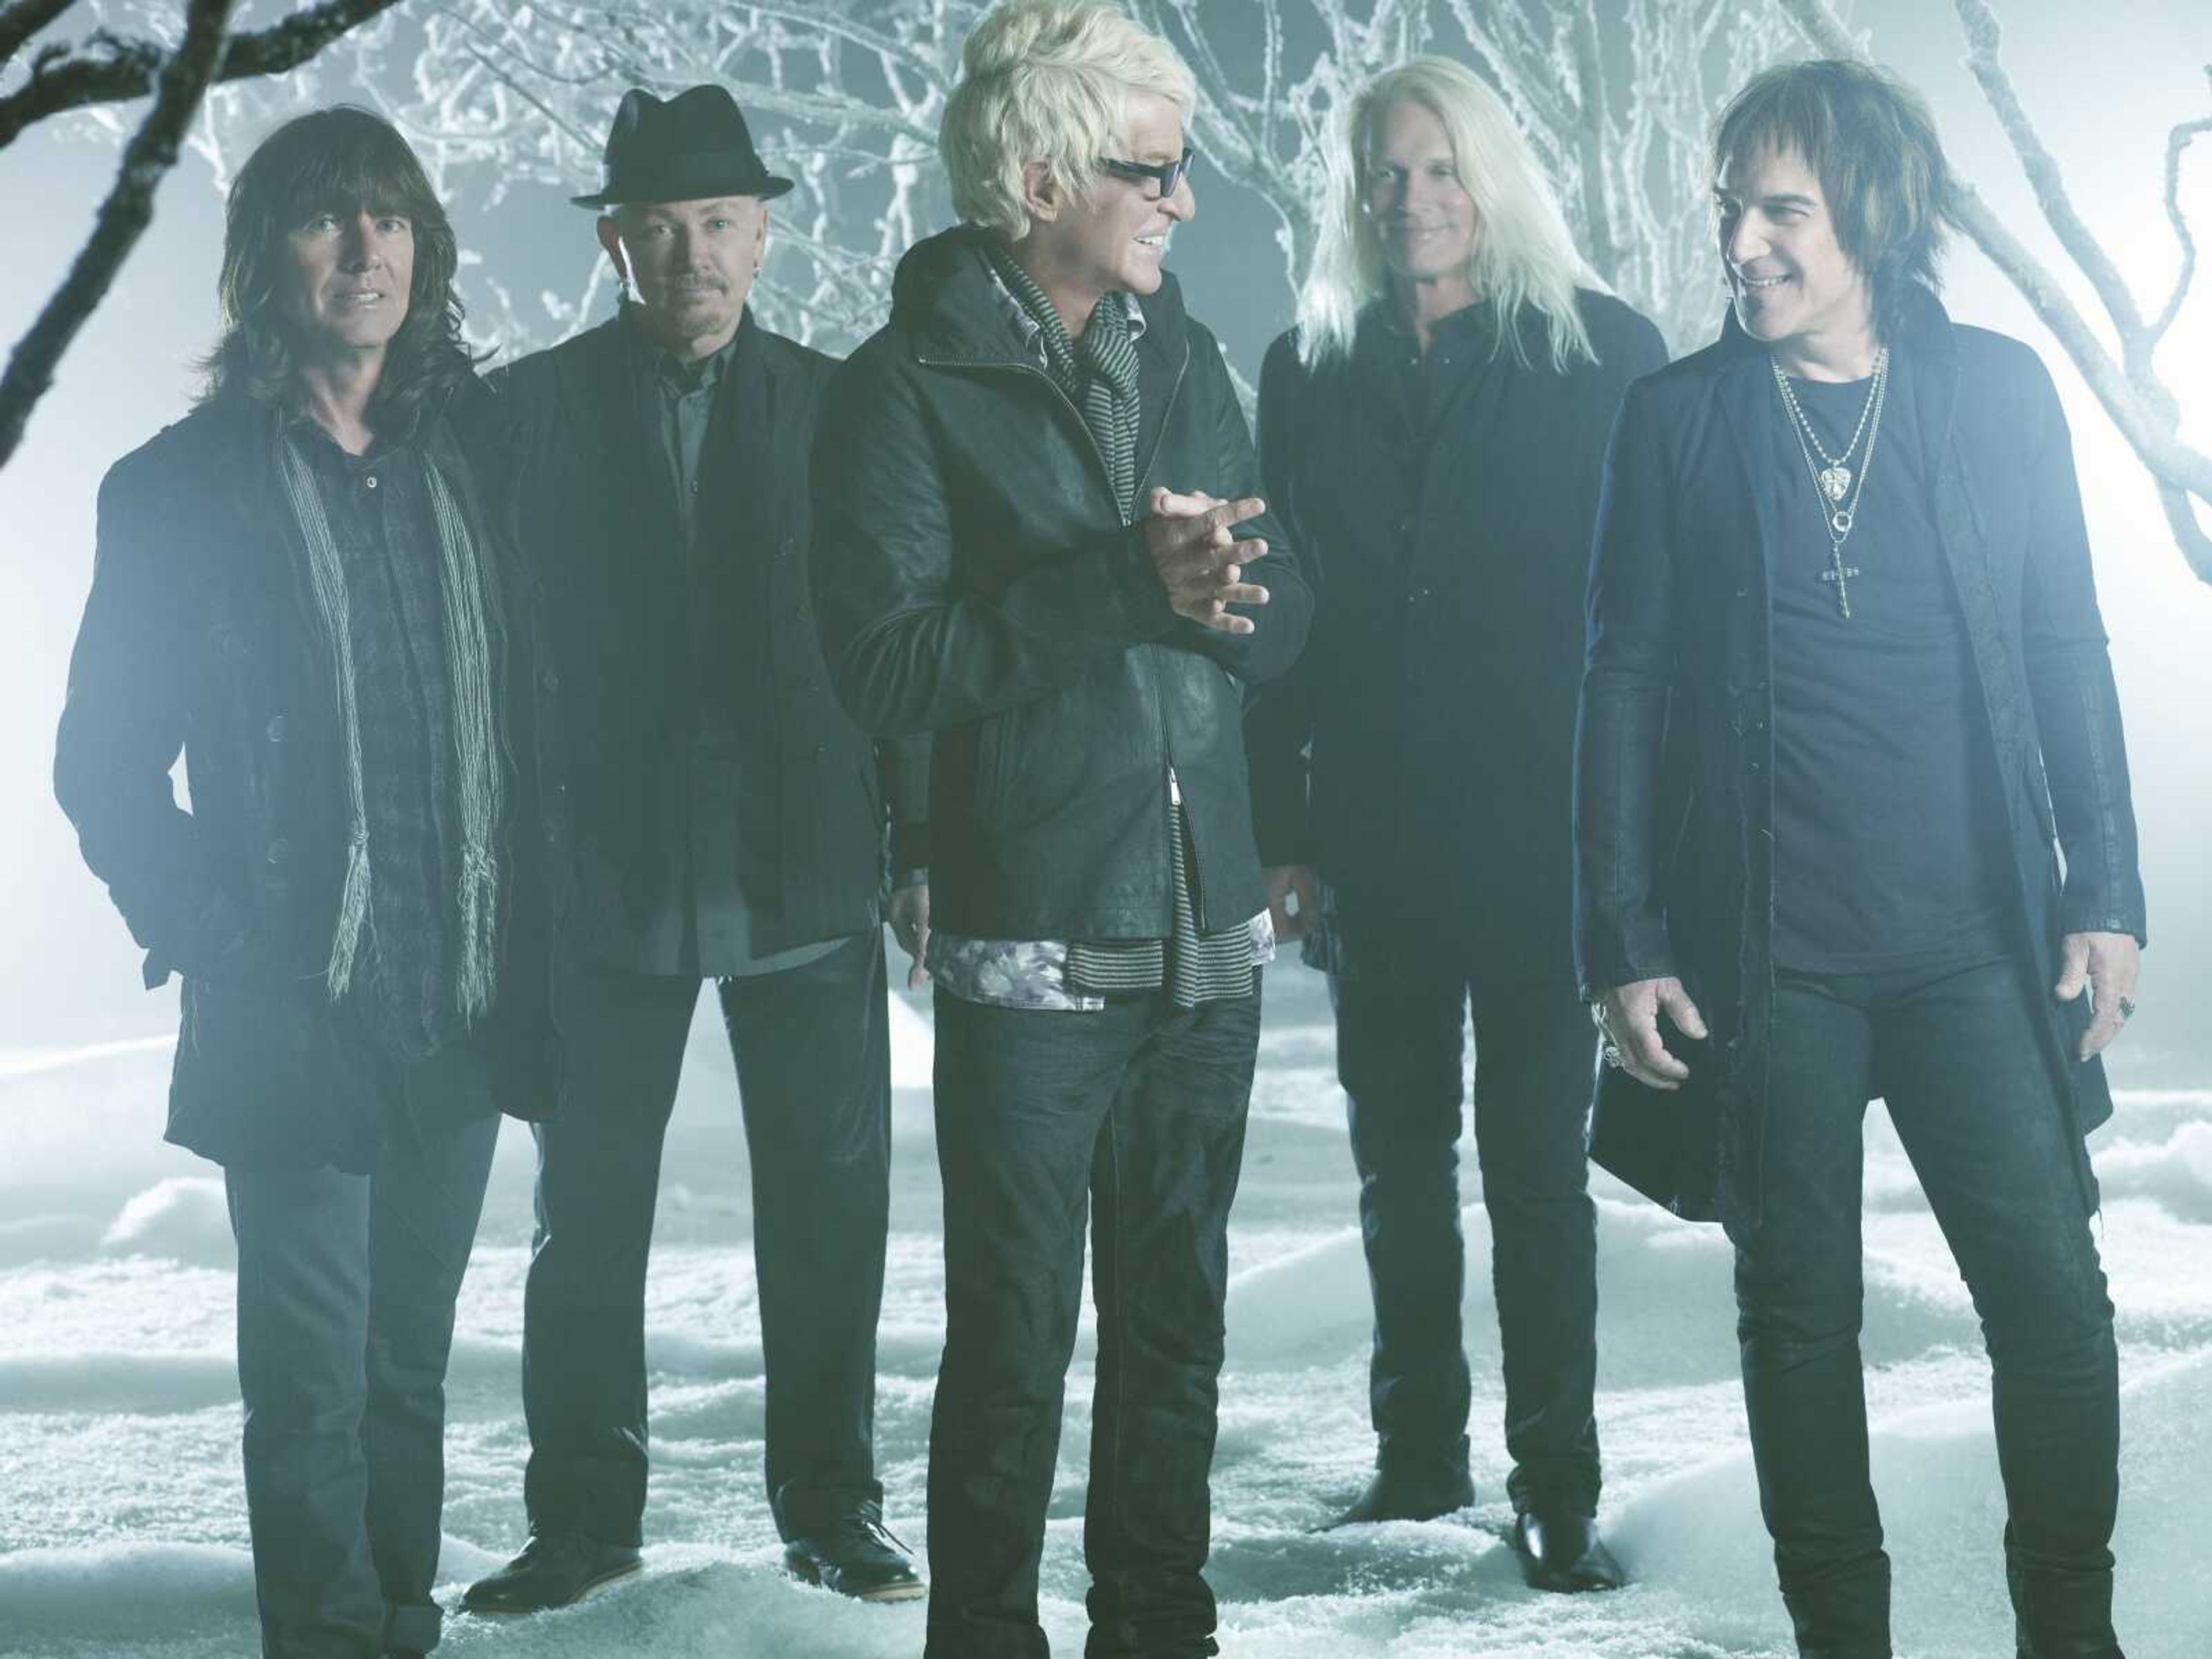 The current members of REO Speedwagon, a classic rock band headed for Cape Girardeau.